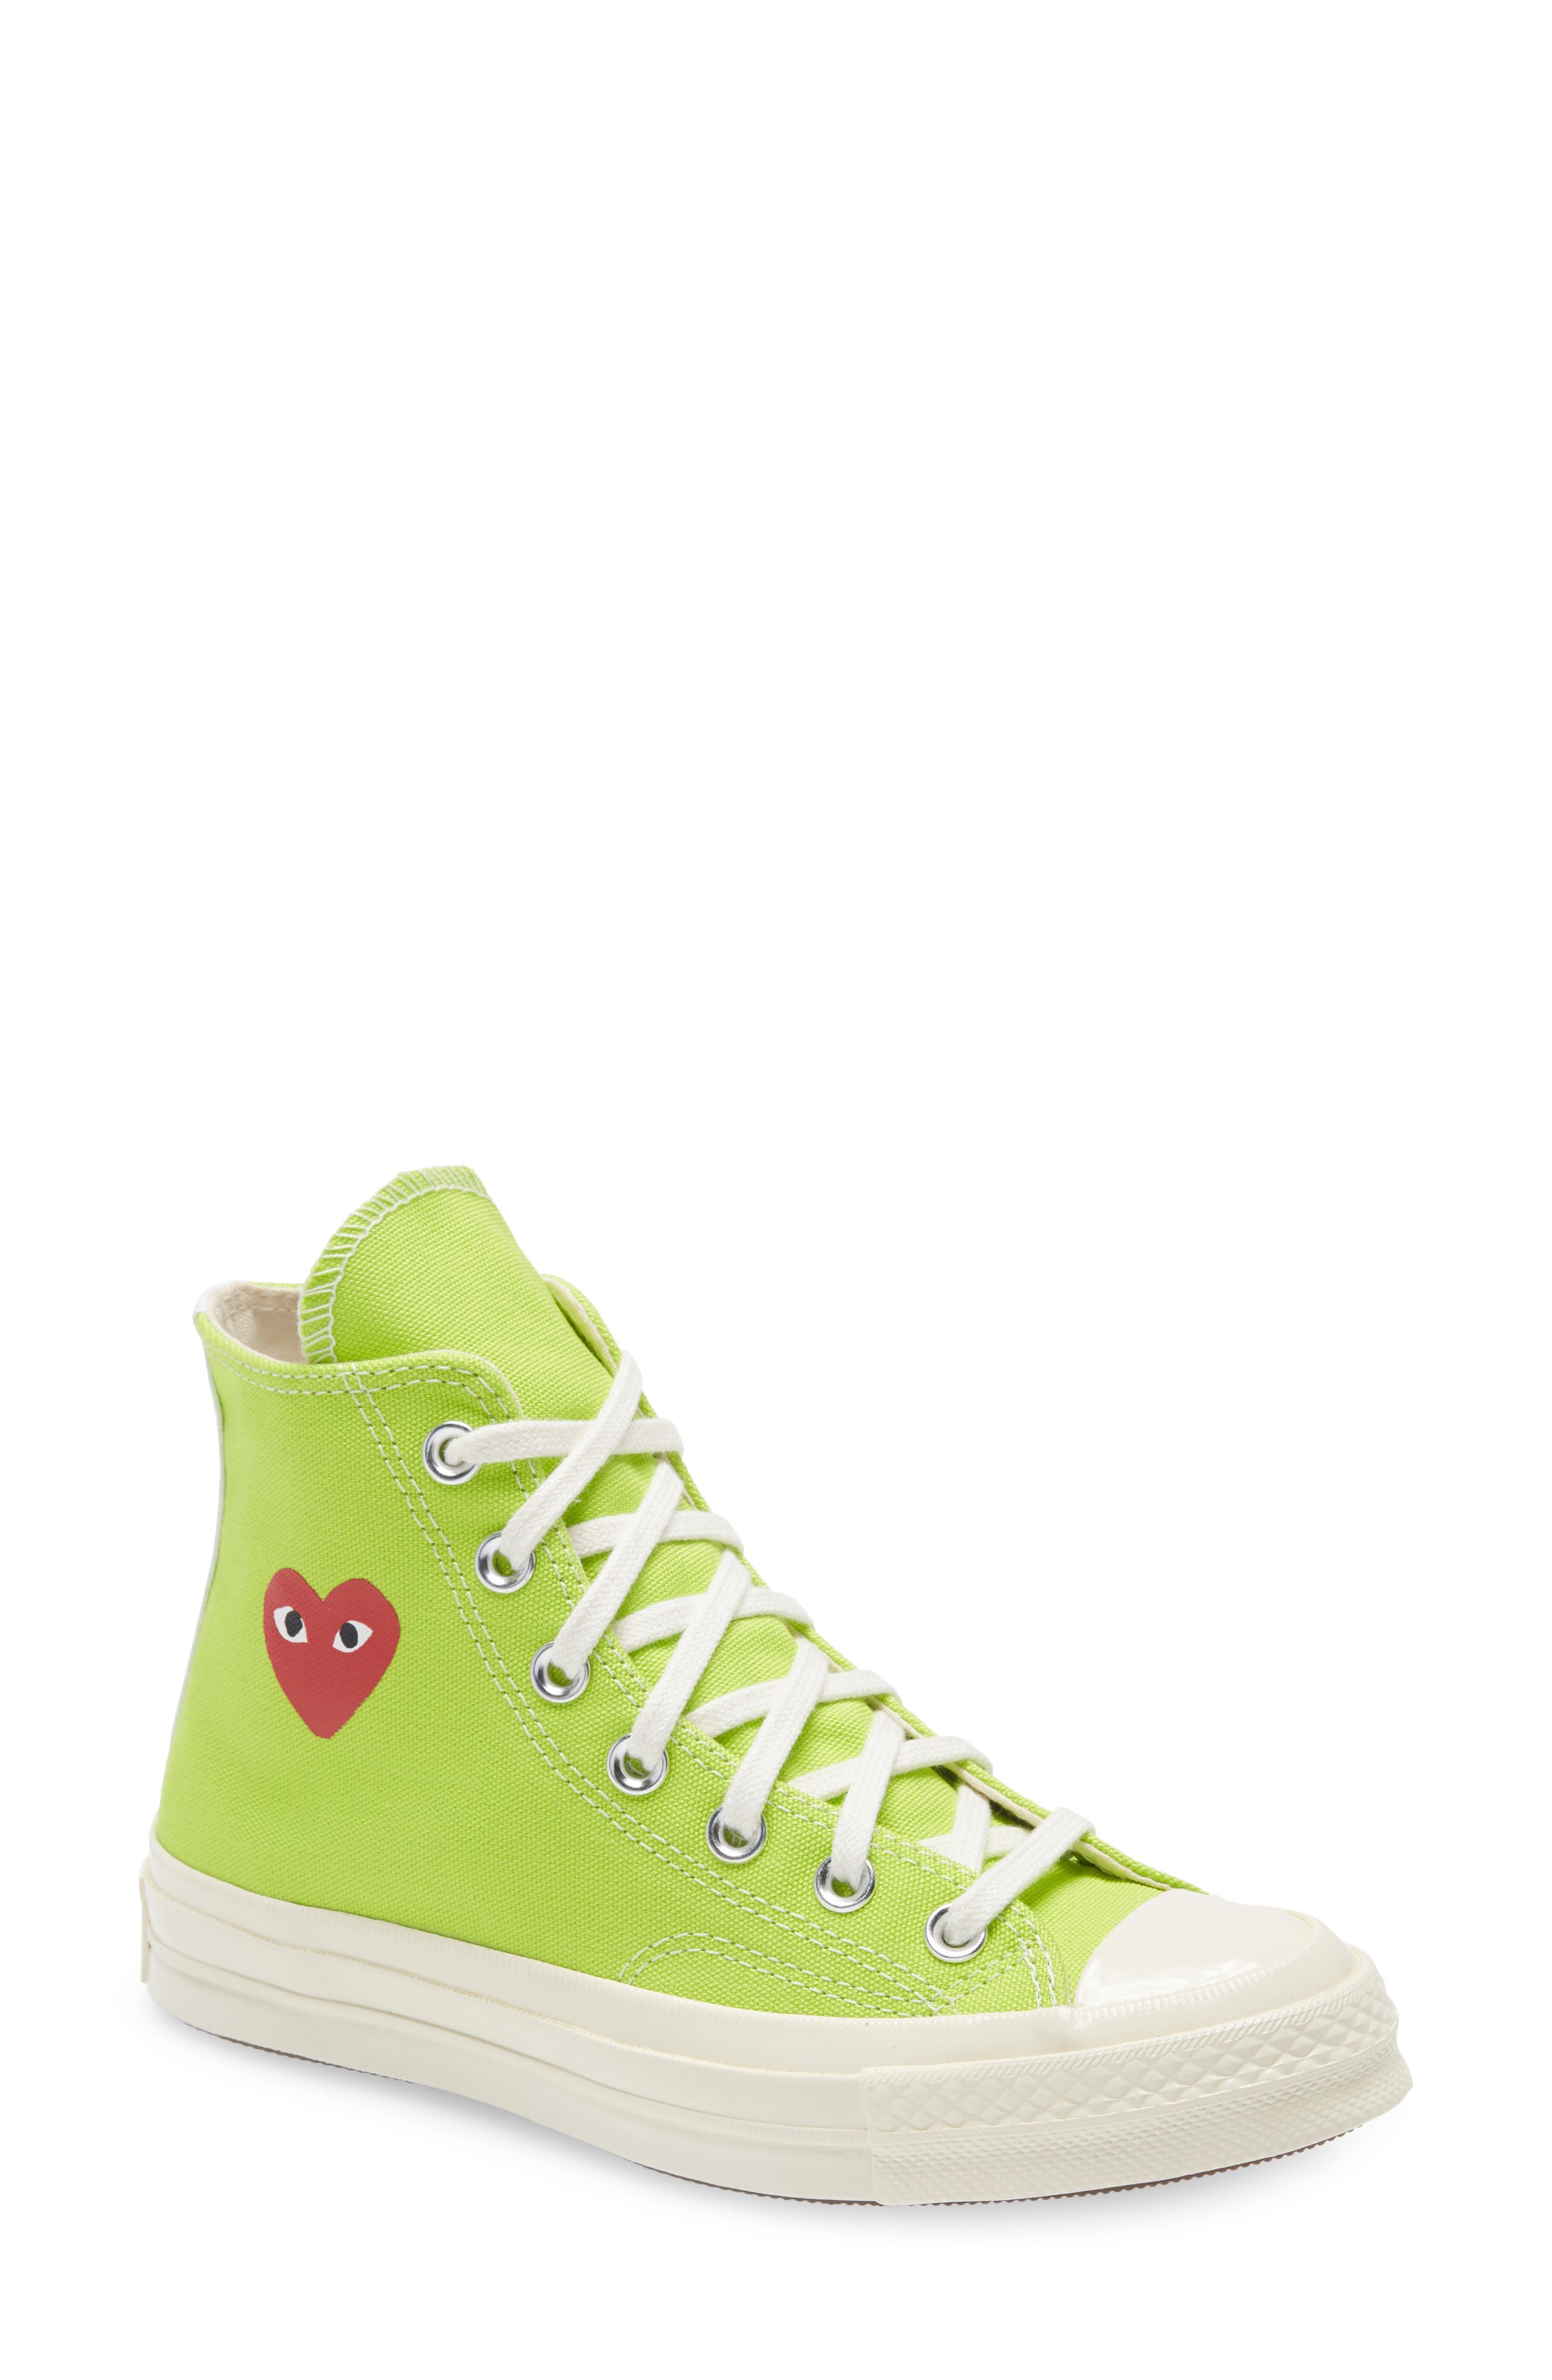 converse play nordstrom